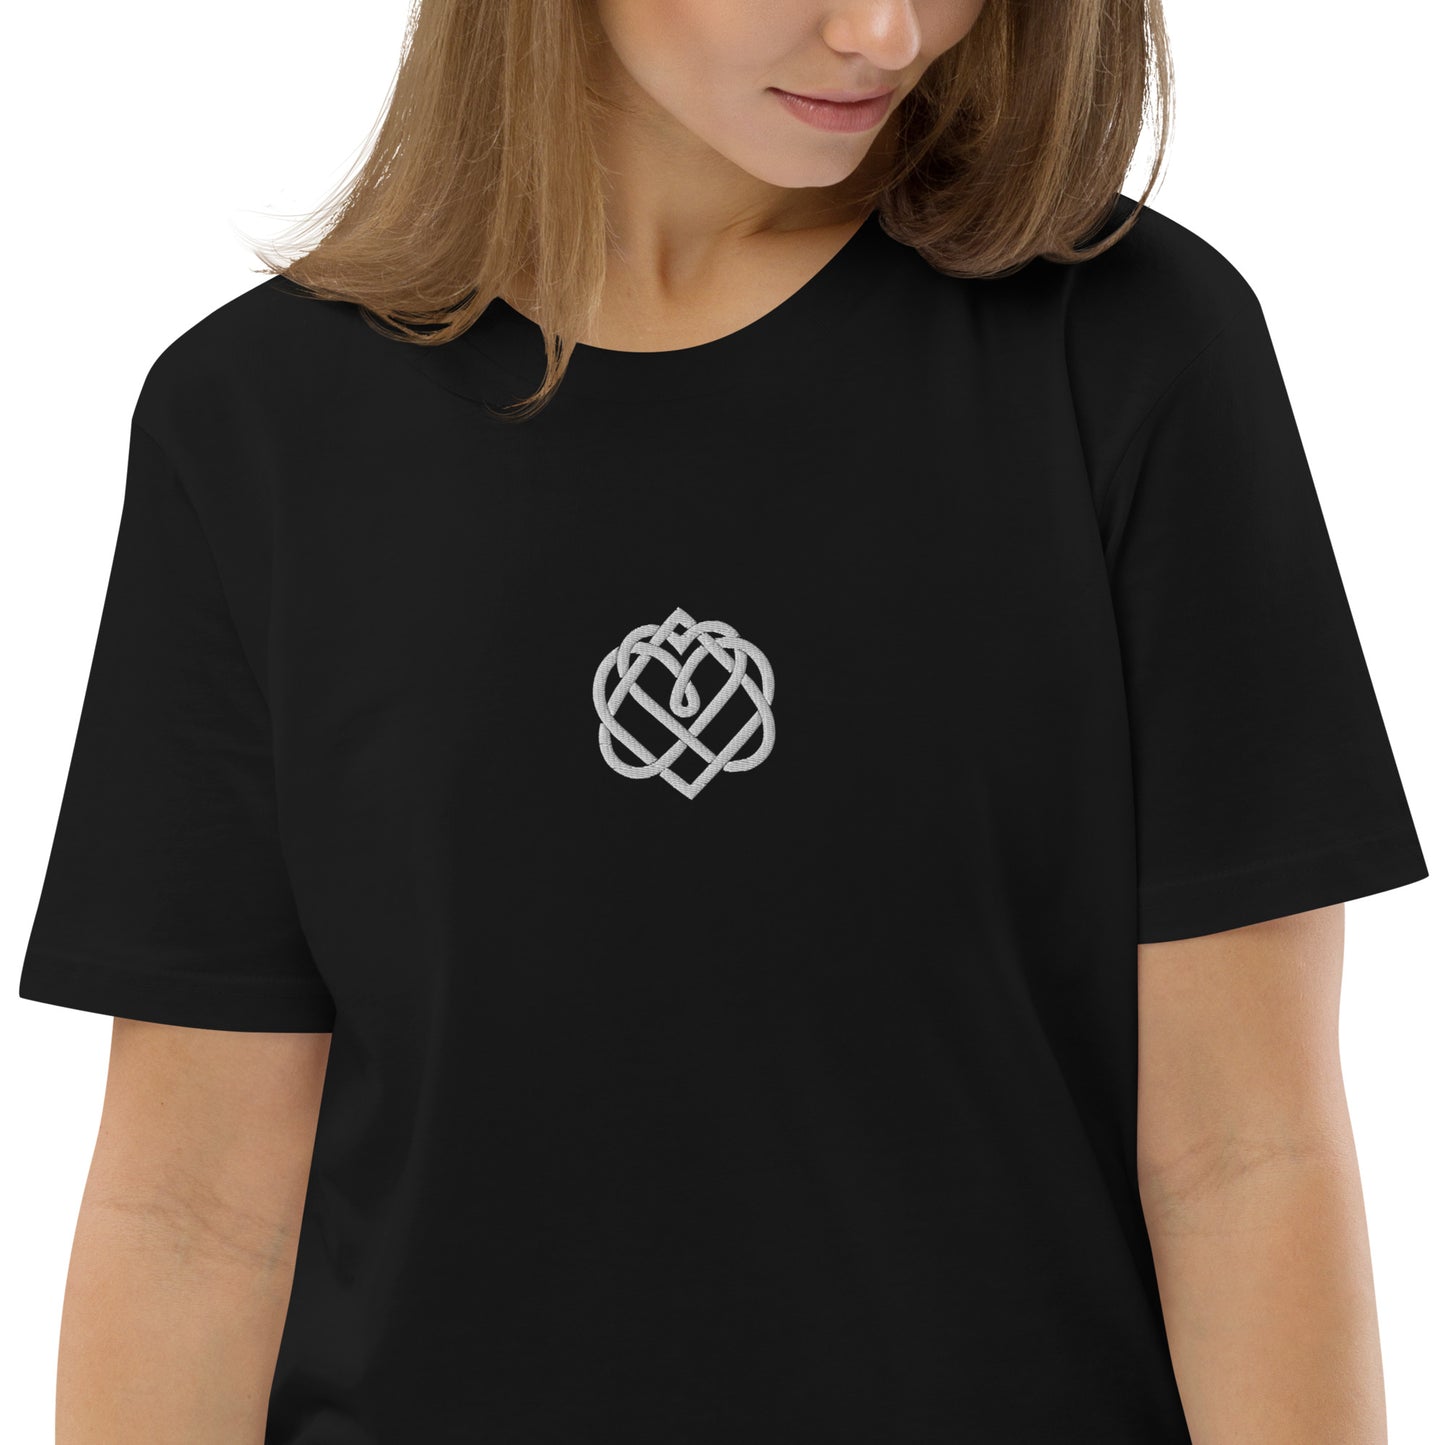 Unisex 100% Organic Cotton Embroidered Heart Initiation T-Shirt